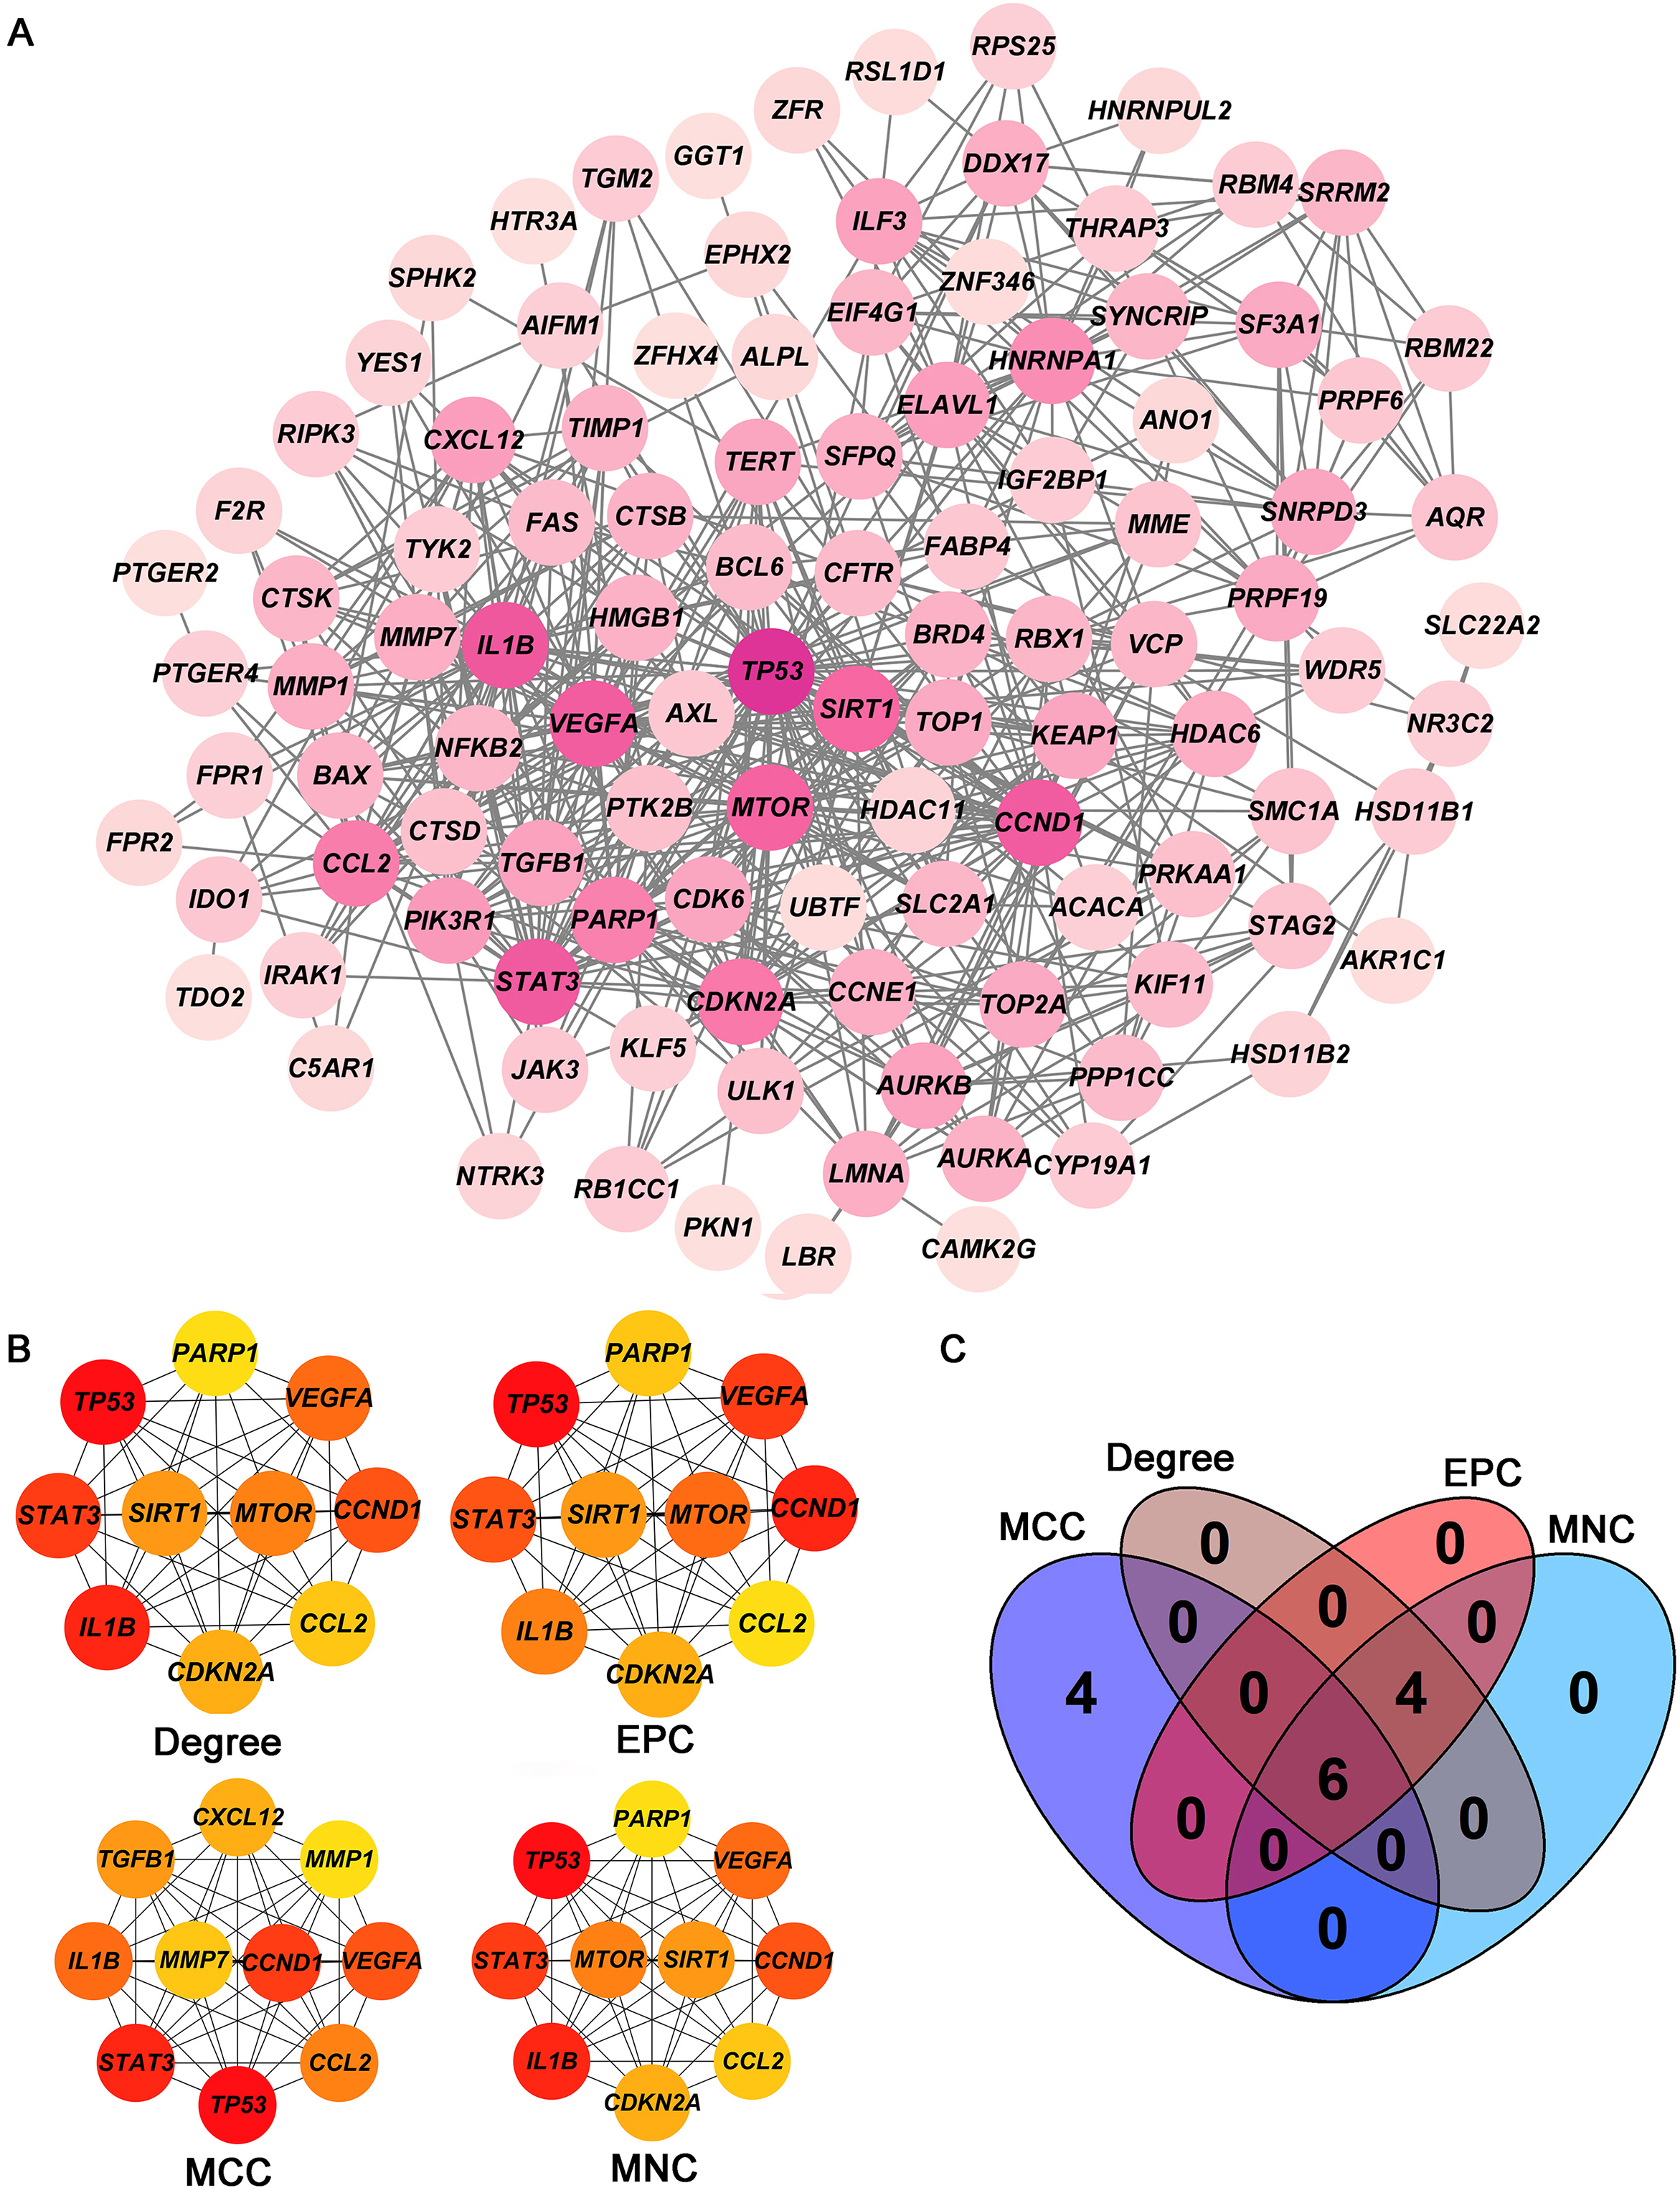 Screening of hub targets. (A) PPI network of 105 intersecting genes. (B) Four core modules (Degree, EPC, MCC, and MNC) in the PPI network. (C) Venn diagram shows the six hub targets among four core modules. PPI: protein-protein interaction.